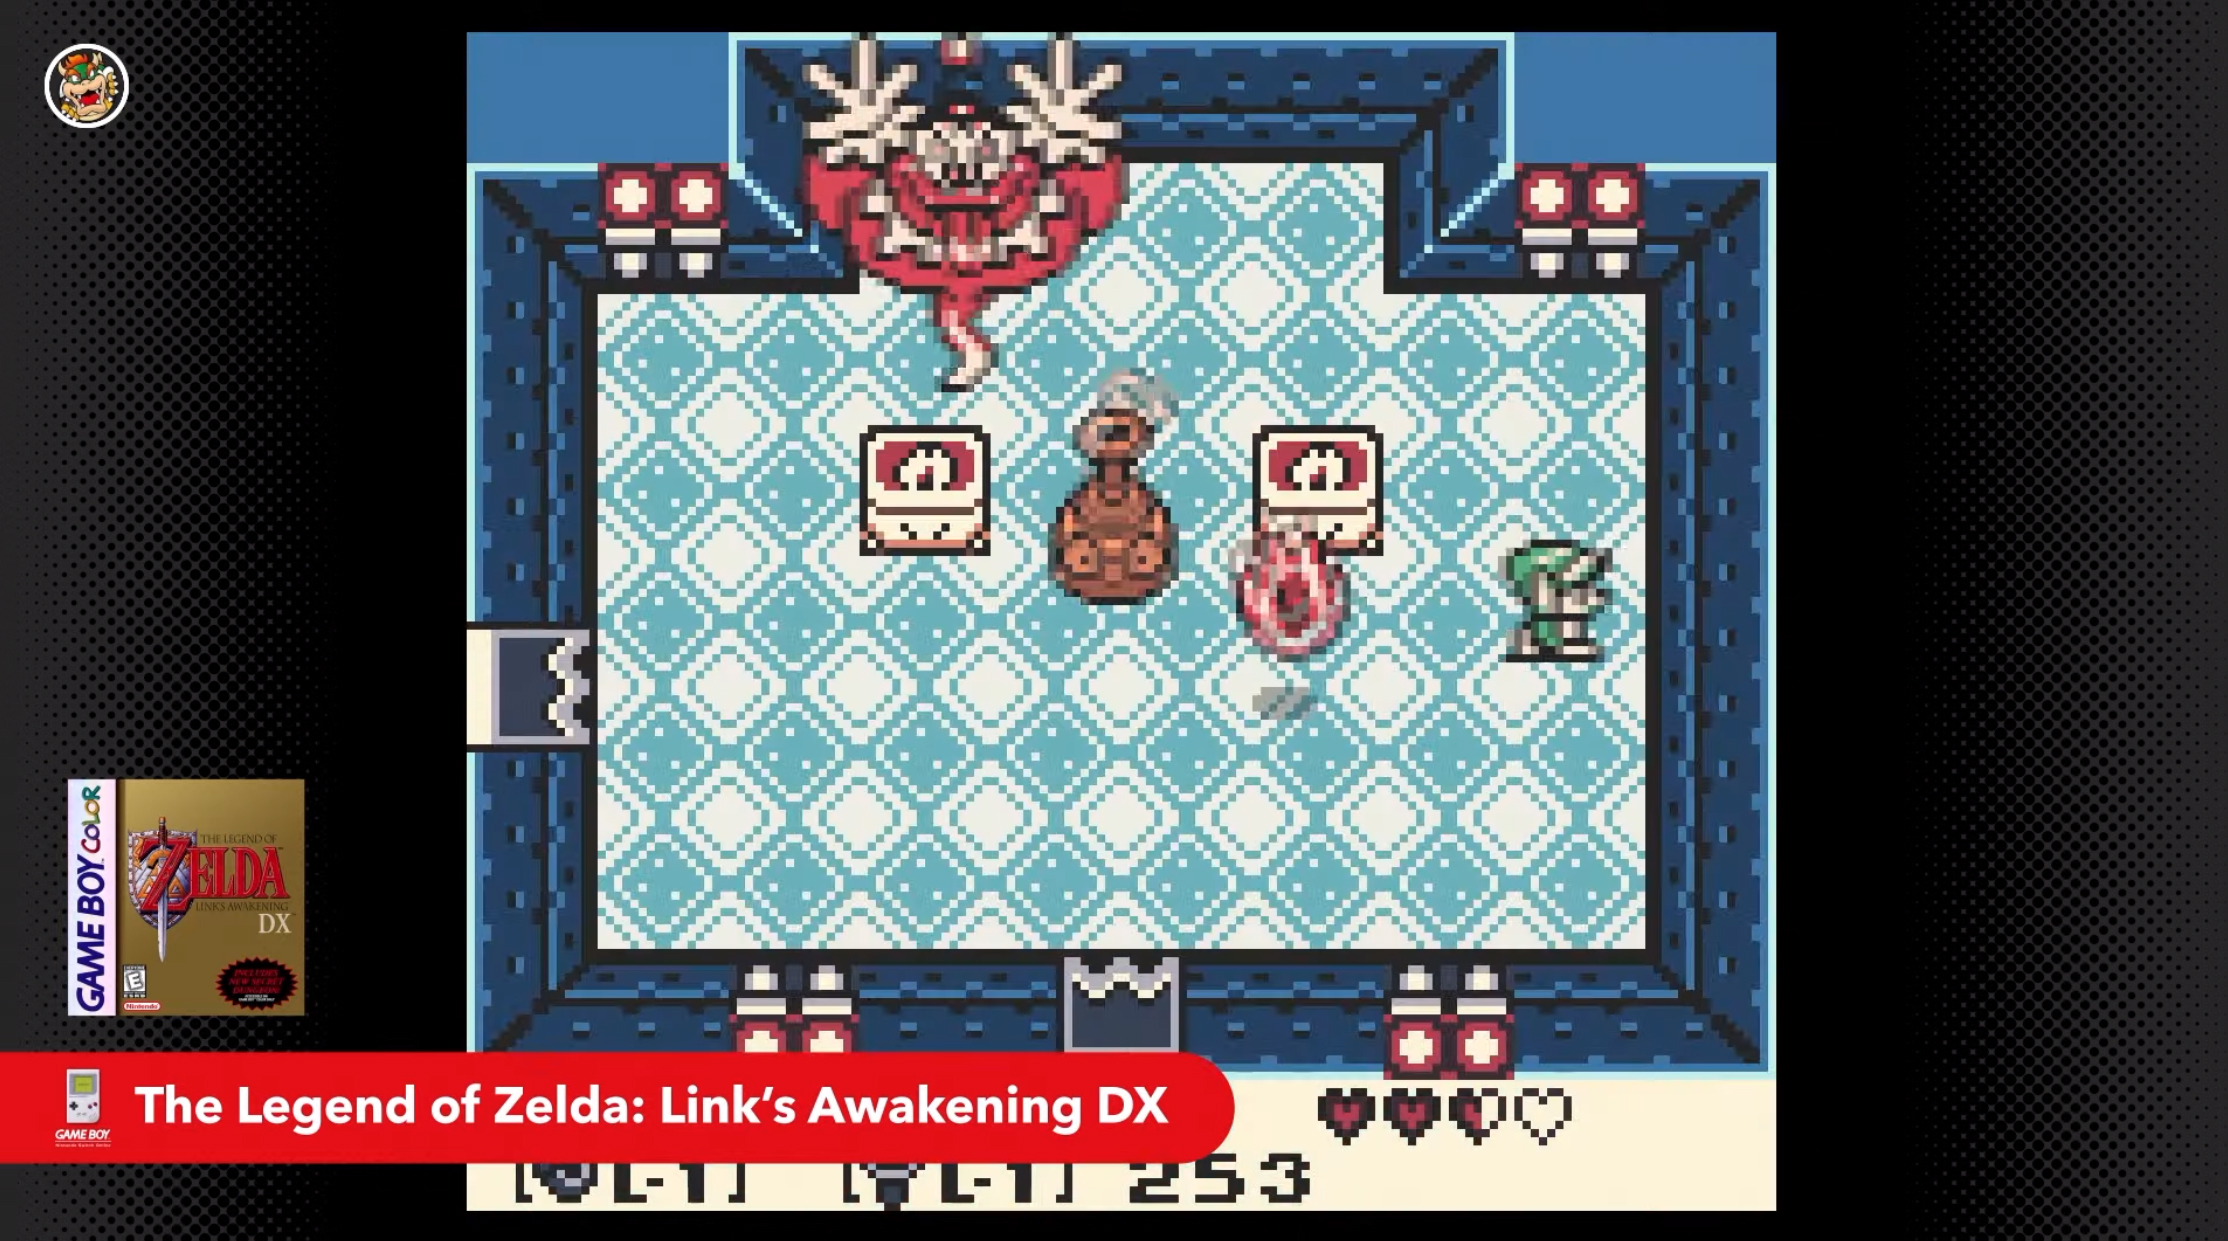 Zelda: Oracle of Ages & Oracle of Seasons Join Switch Online